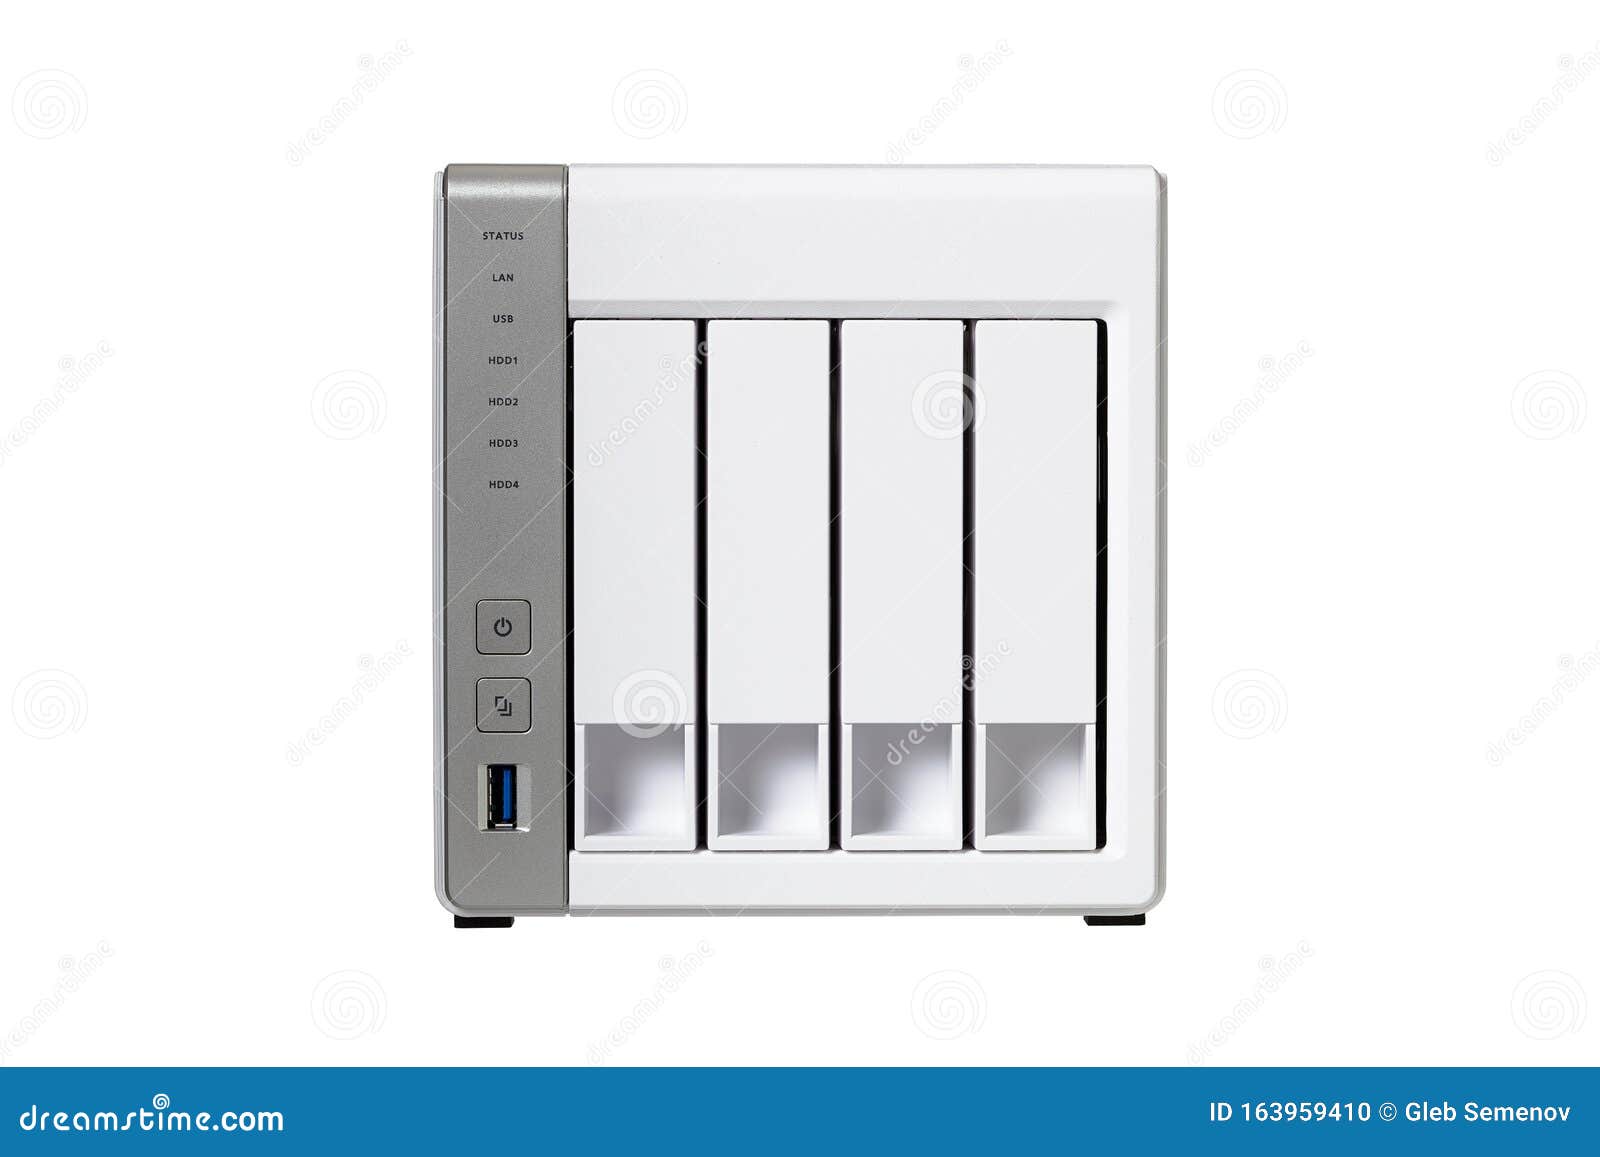 nas at 4 compartments for hd